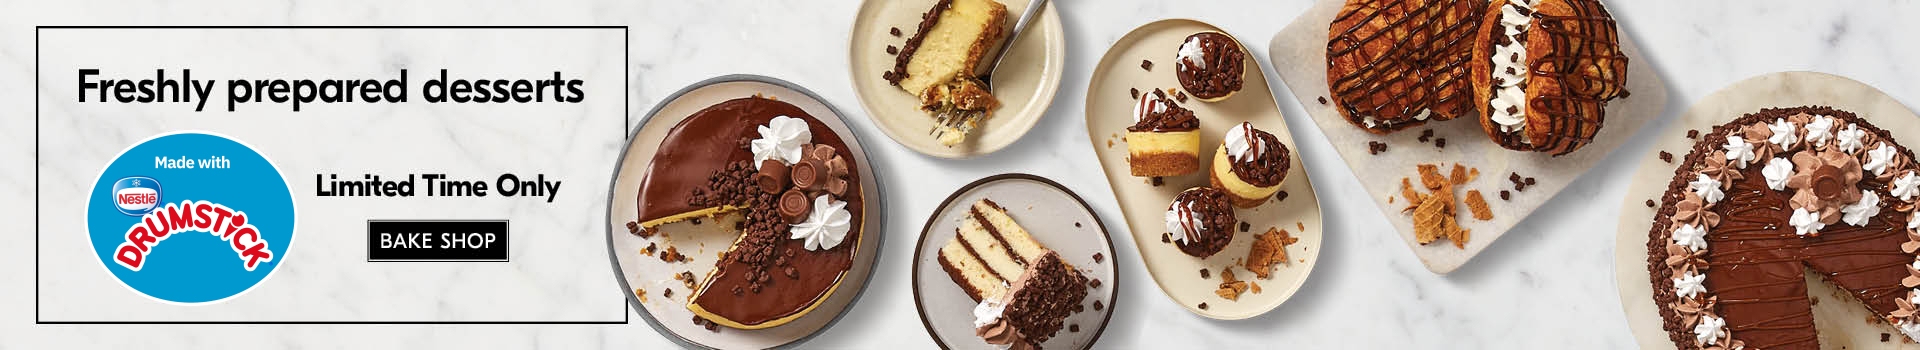 Selection of NESTLÃƒâ€° DRUMSTICK infused desserts ranging from a cake, cake slices and croissants on white plates, sitting on a neutral, marbled background.